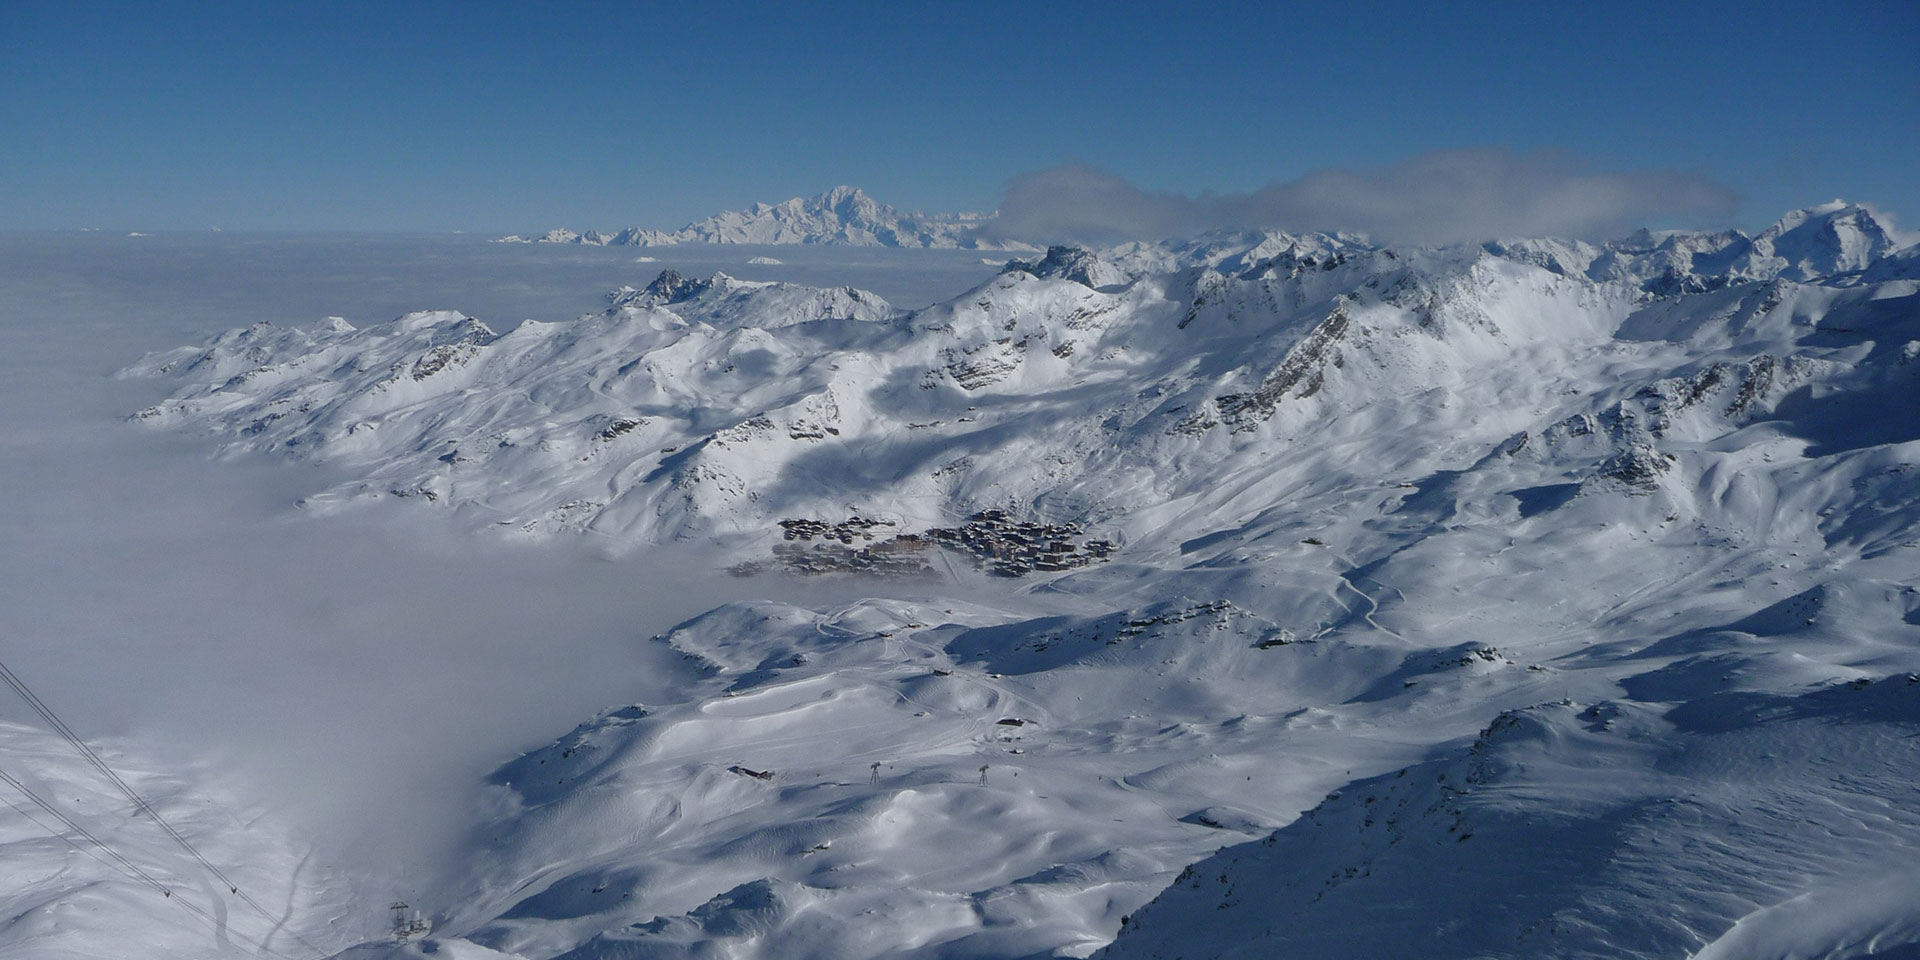 Val Thorens in winter seen from the top of the Cime Caron cable car with Mont Blanc on the horizon.